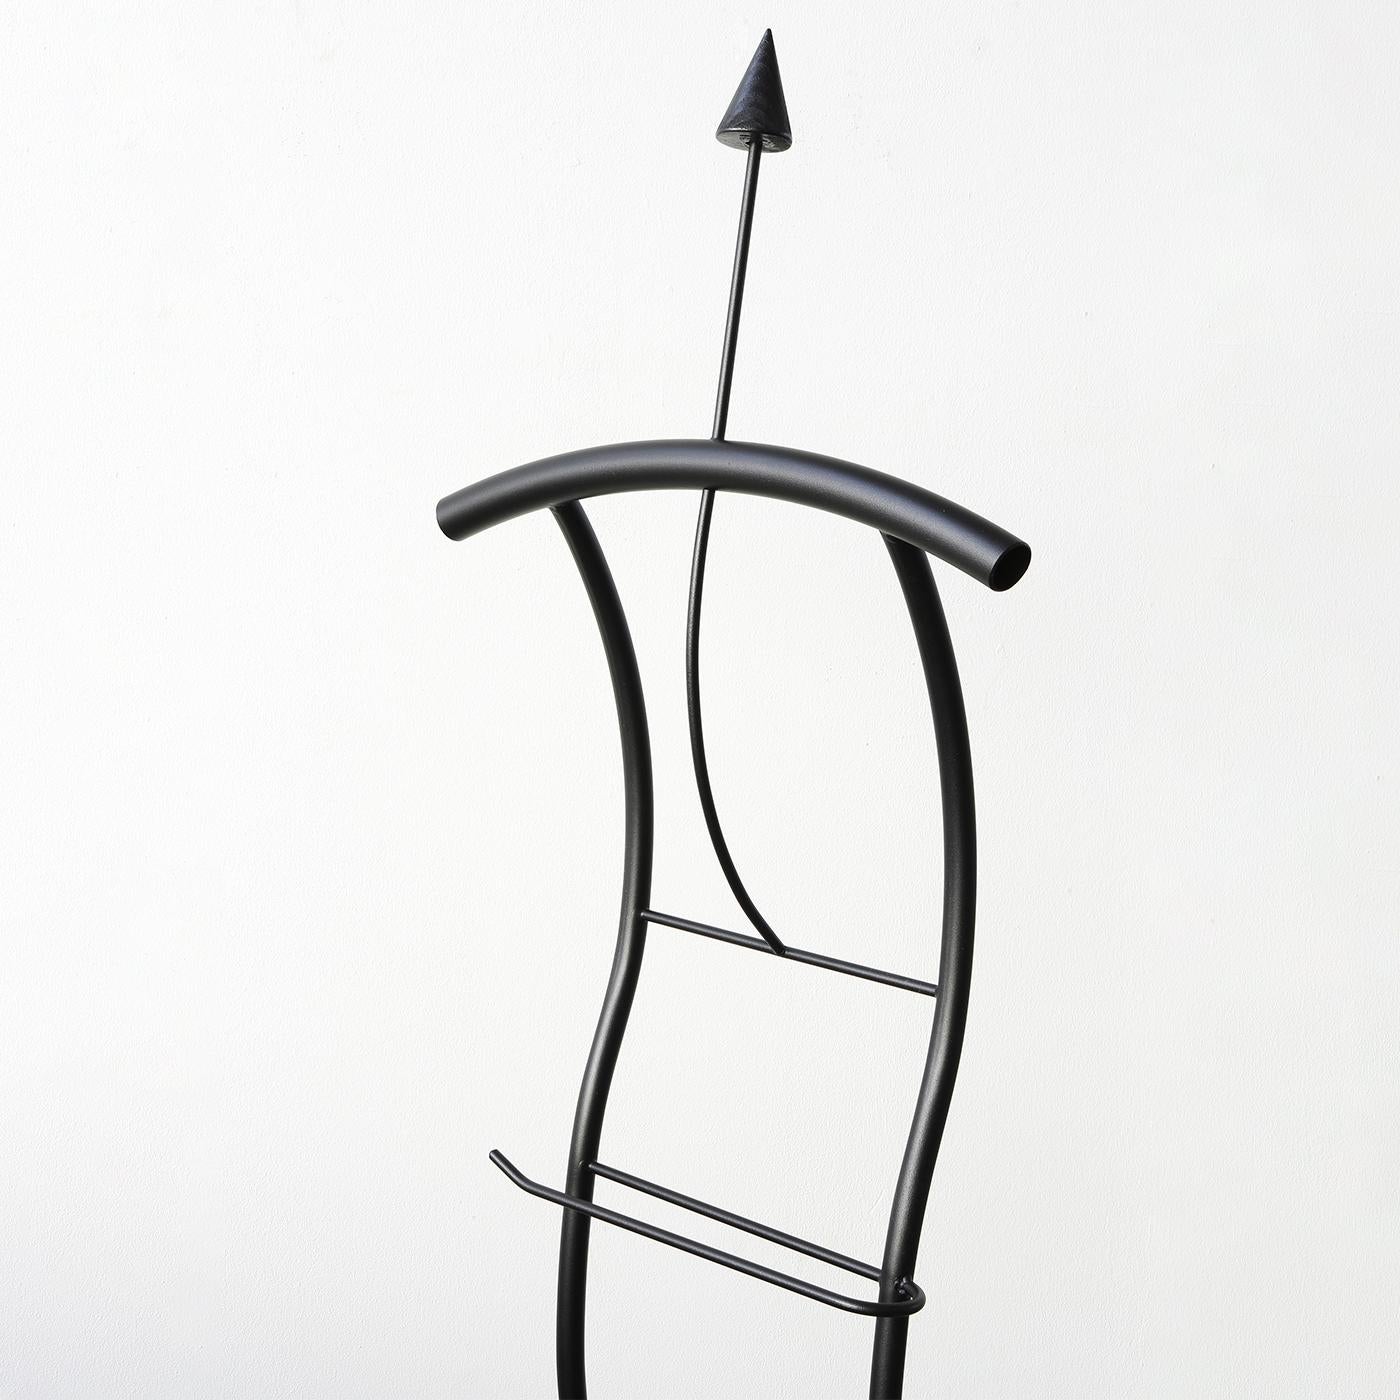 Fluid lines trace the harmonious profiles of this elegant modern-style valet stand, its copper-black frame finished with a refined sand effect. An ideal solution for keeping suits crease-free while keeping belts organized, it comes complete with a